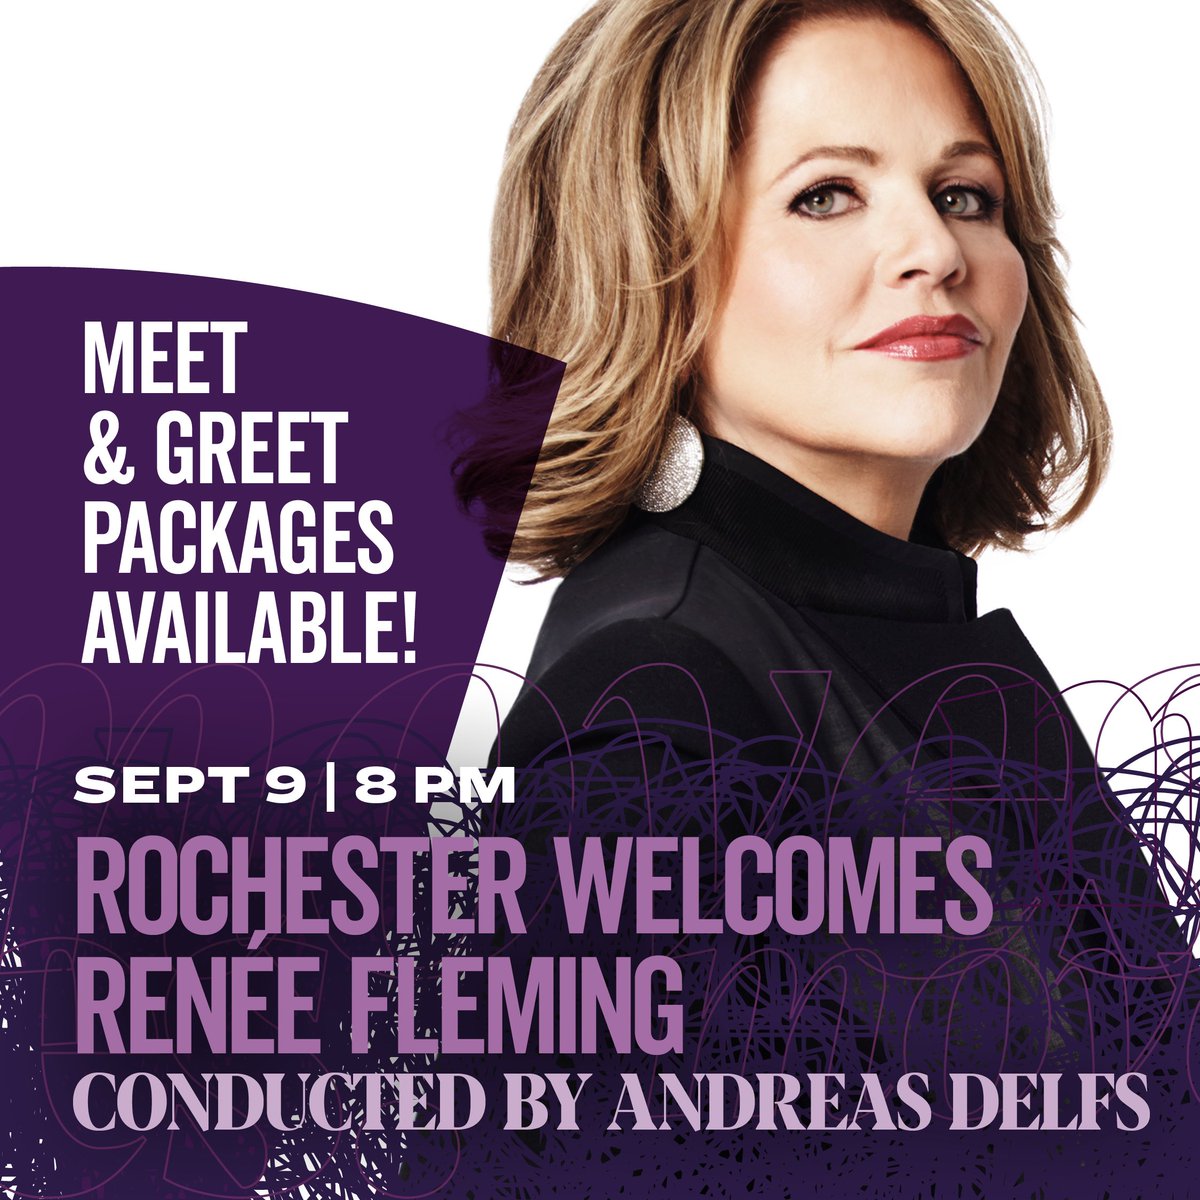 💃 12 SEATS LEFT for the Renee Fleming Meet & Greet Package includes • Pre-concert cocktails & dinner at The Mercantile on Main (240 E. Main Street) prior to concert • 1 premium Renee Fleming concert ticket* • Post-concert dancing, dessert, and Meet & Greet with Ms. Fleming